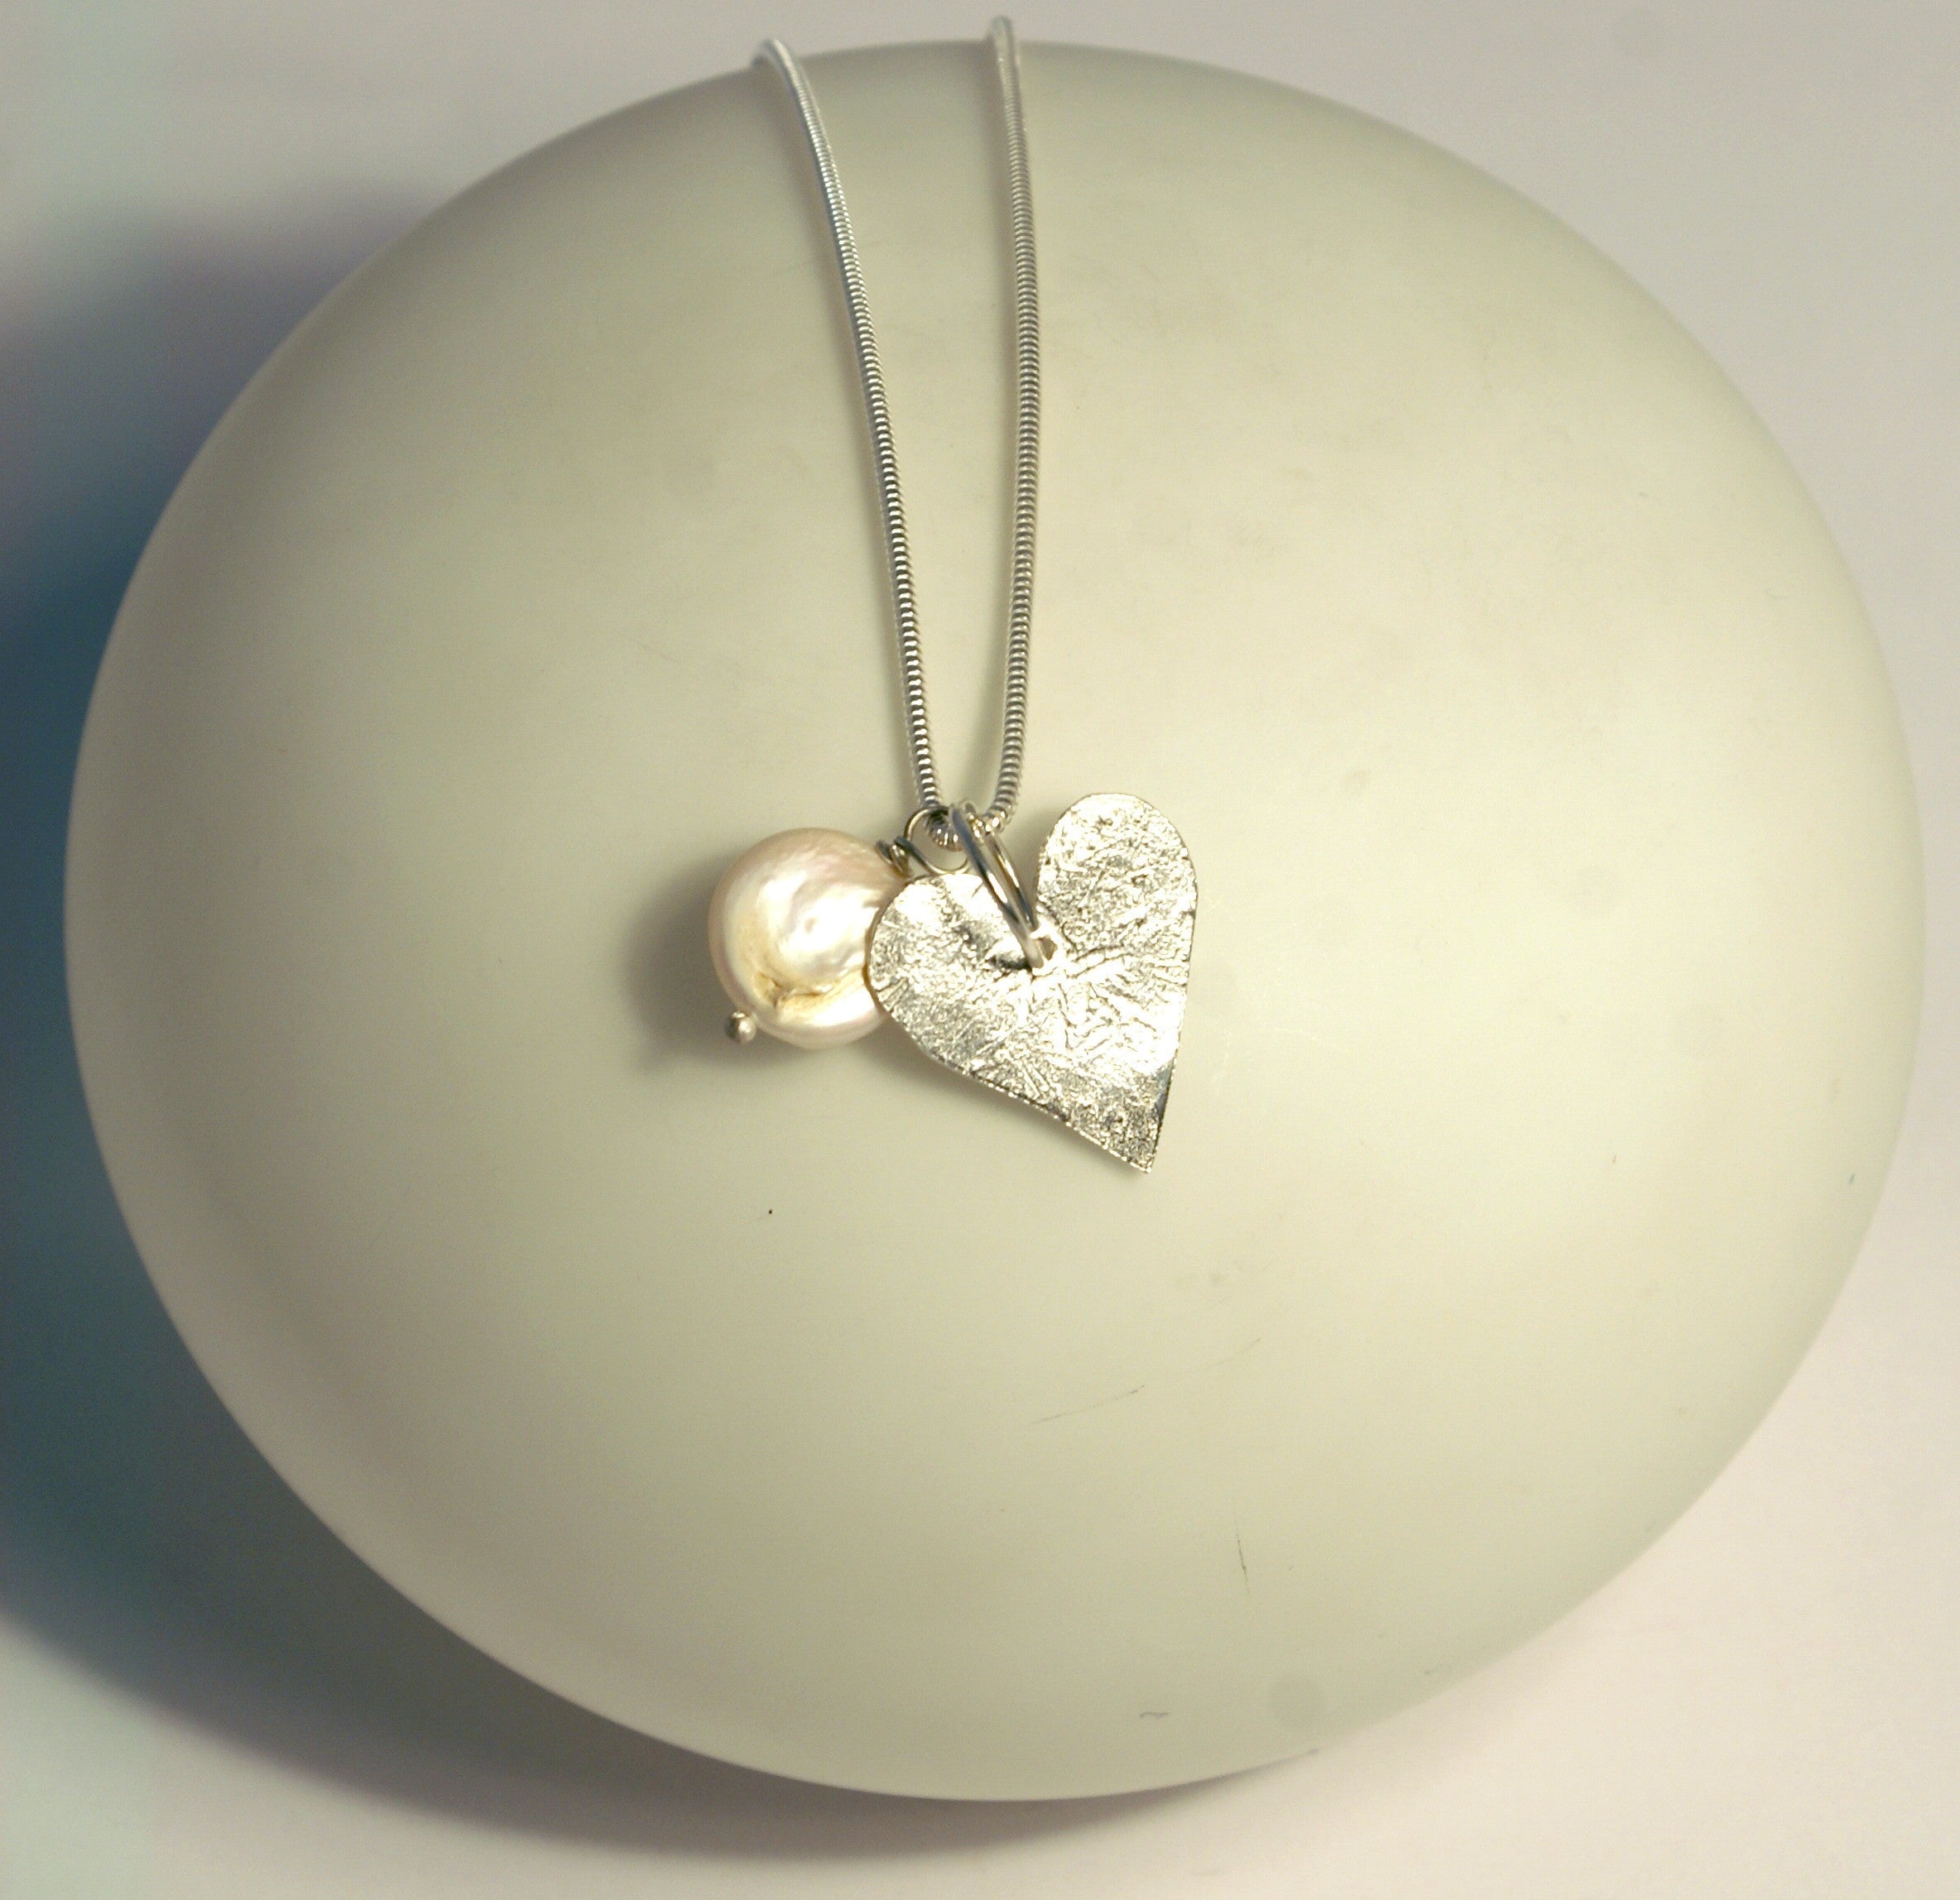 Heart & White Pearl Necklace - The Nancy Smillie Shop - Art, Jewellery & Designer Gifts Glasgow